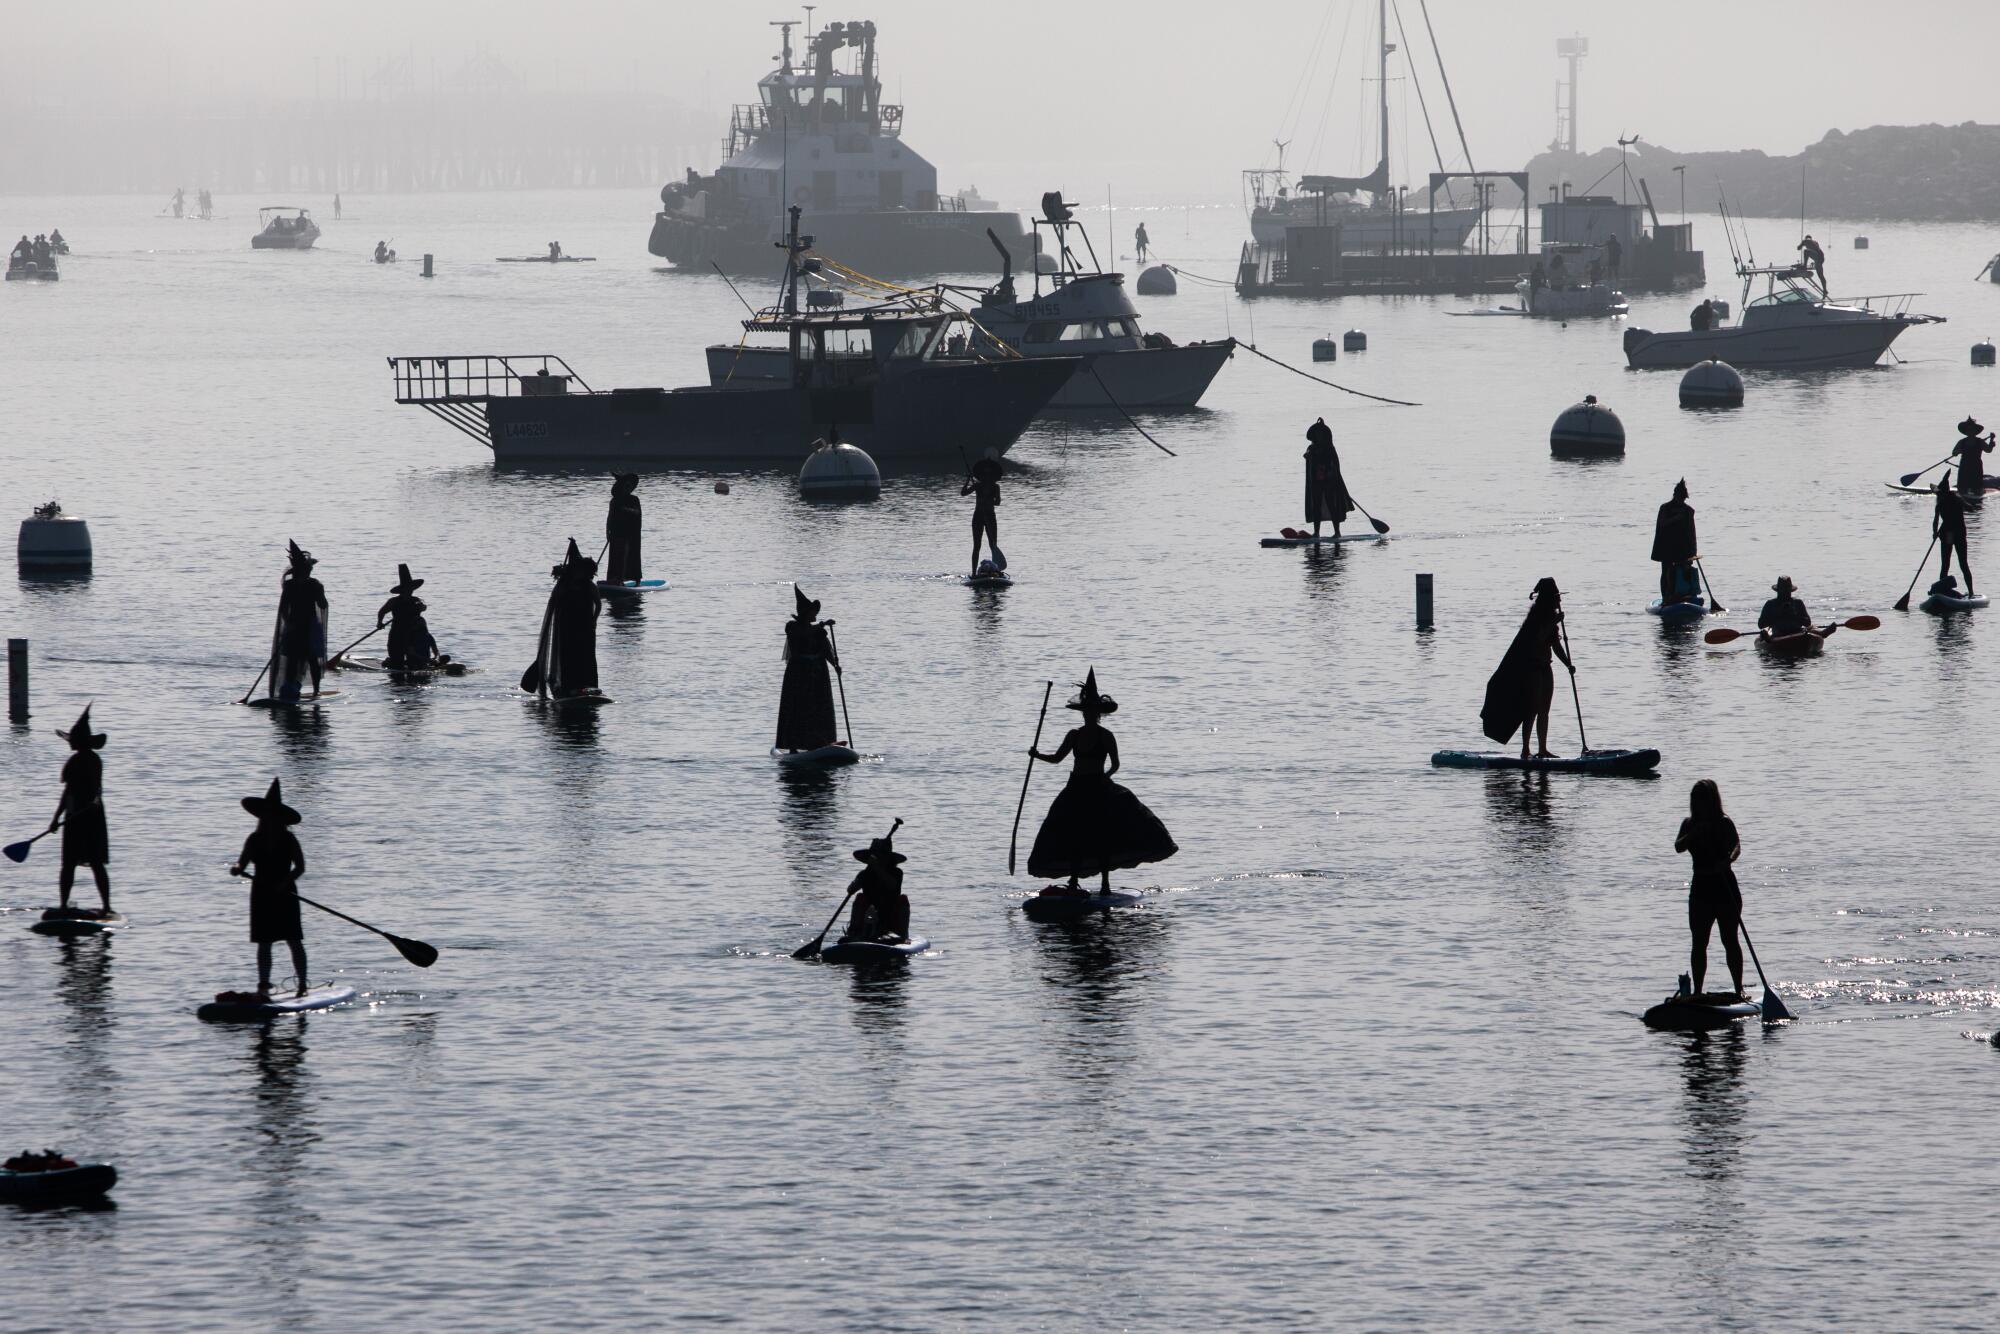 Boats and silhouettes of dozens of witches on stand-up paddle boards make their way across King Harbor in Redondo Beach.